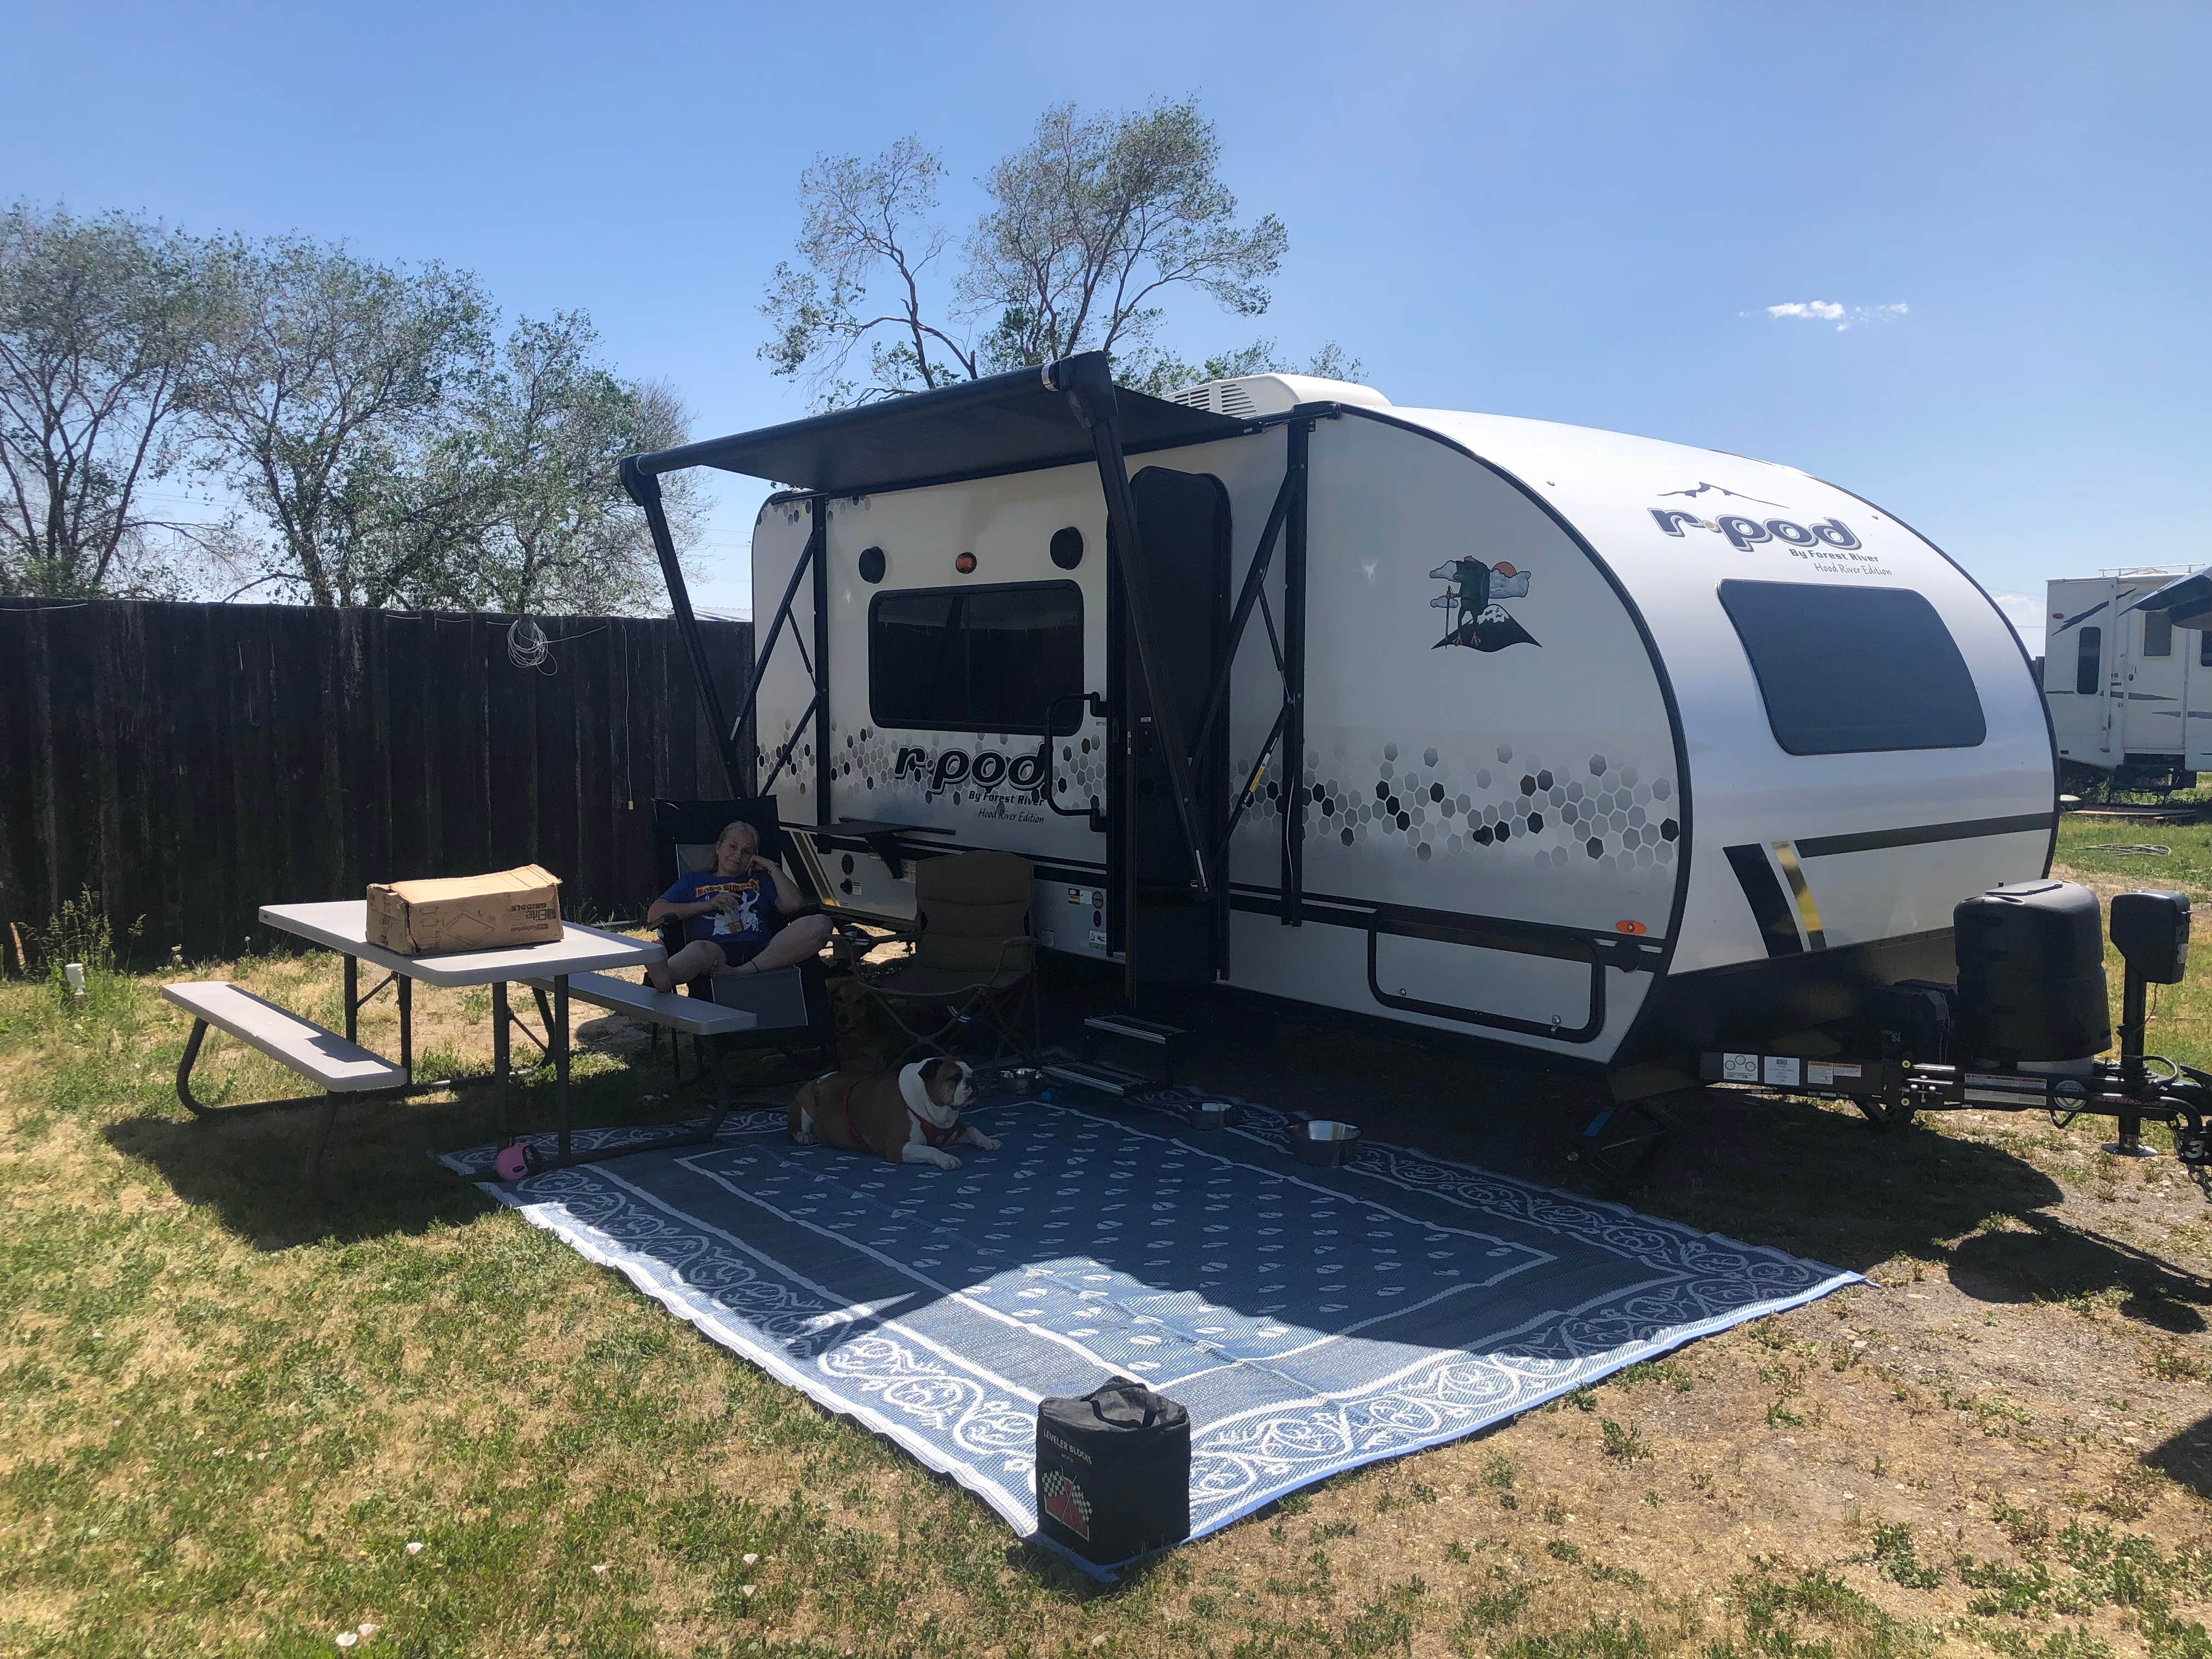 Camper submitted image from Earp & James Hitching Post - 5